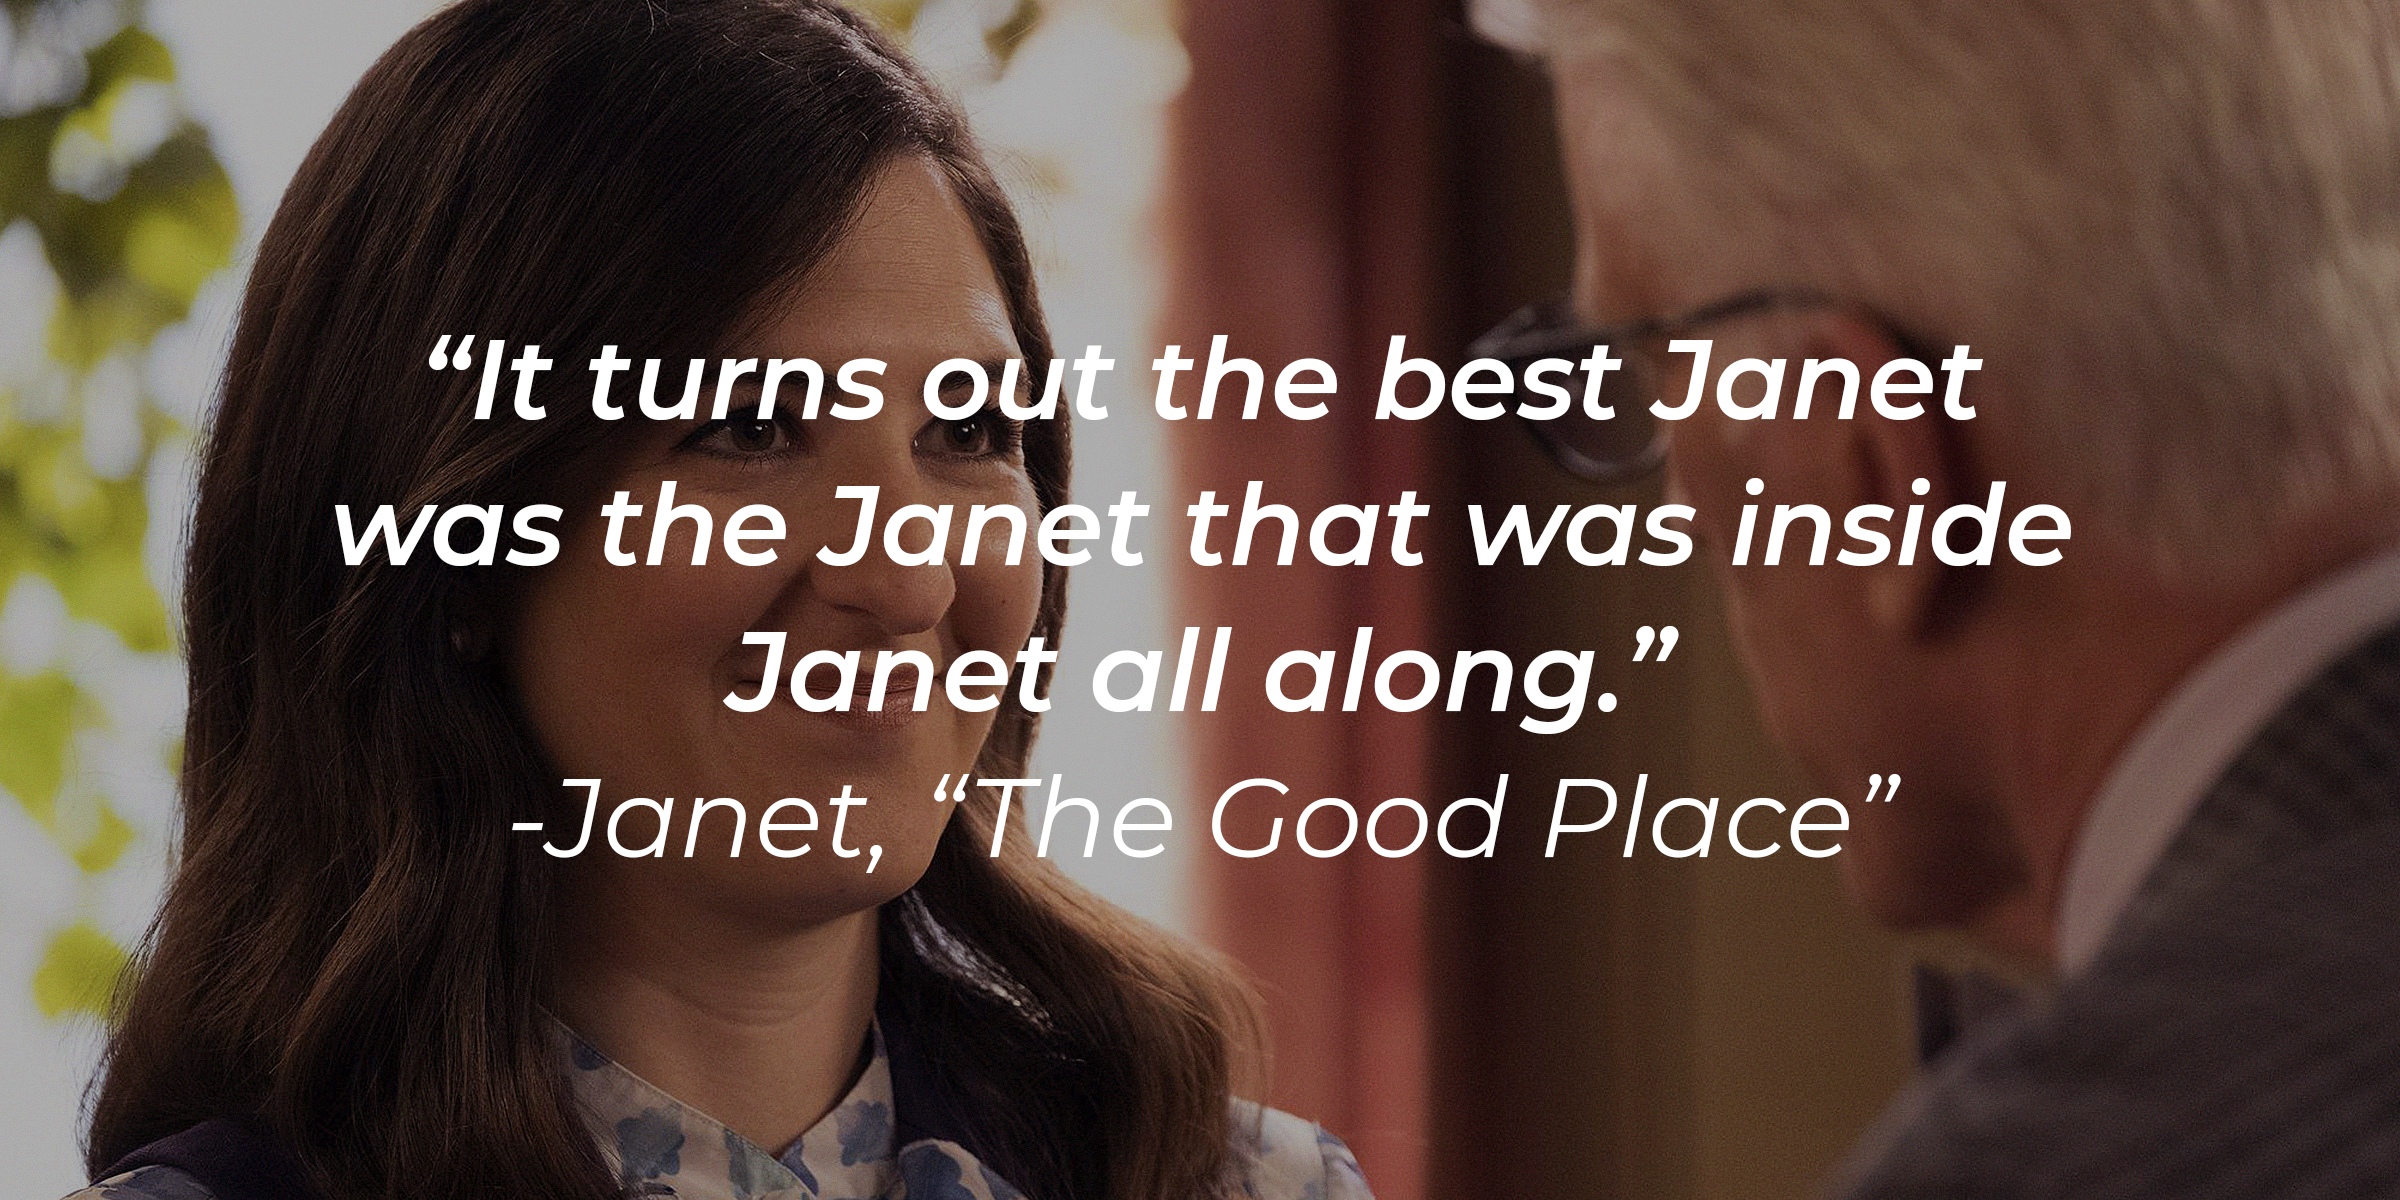 A photo of Janet with Janet's quote: “It turns out the best Janet was the Janet that was inside Janet all along.” | Source: facebook.com/NBCTheGoodPlace